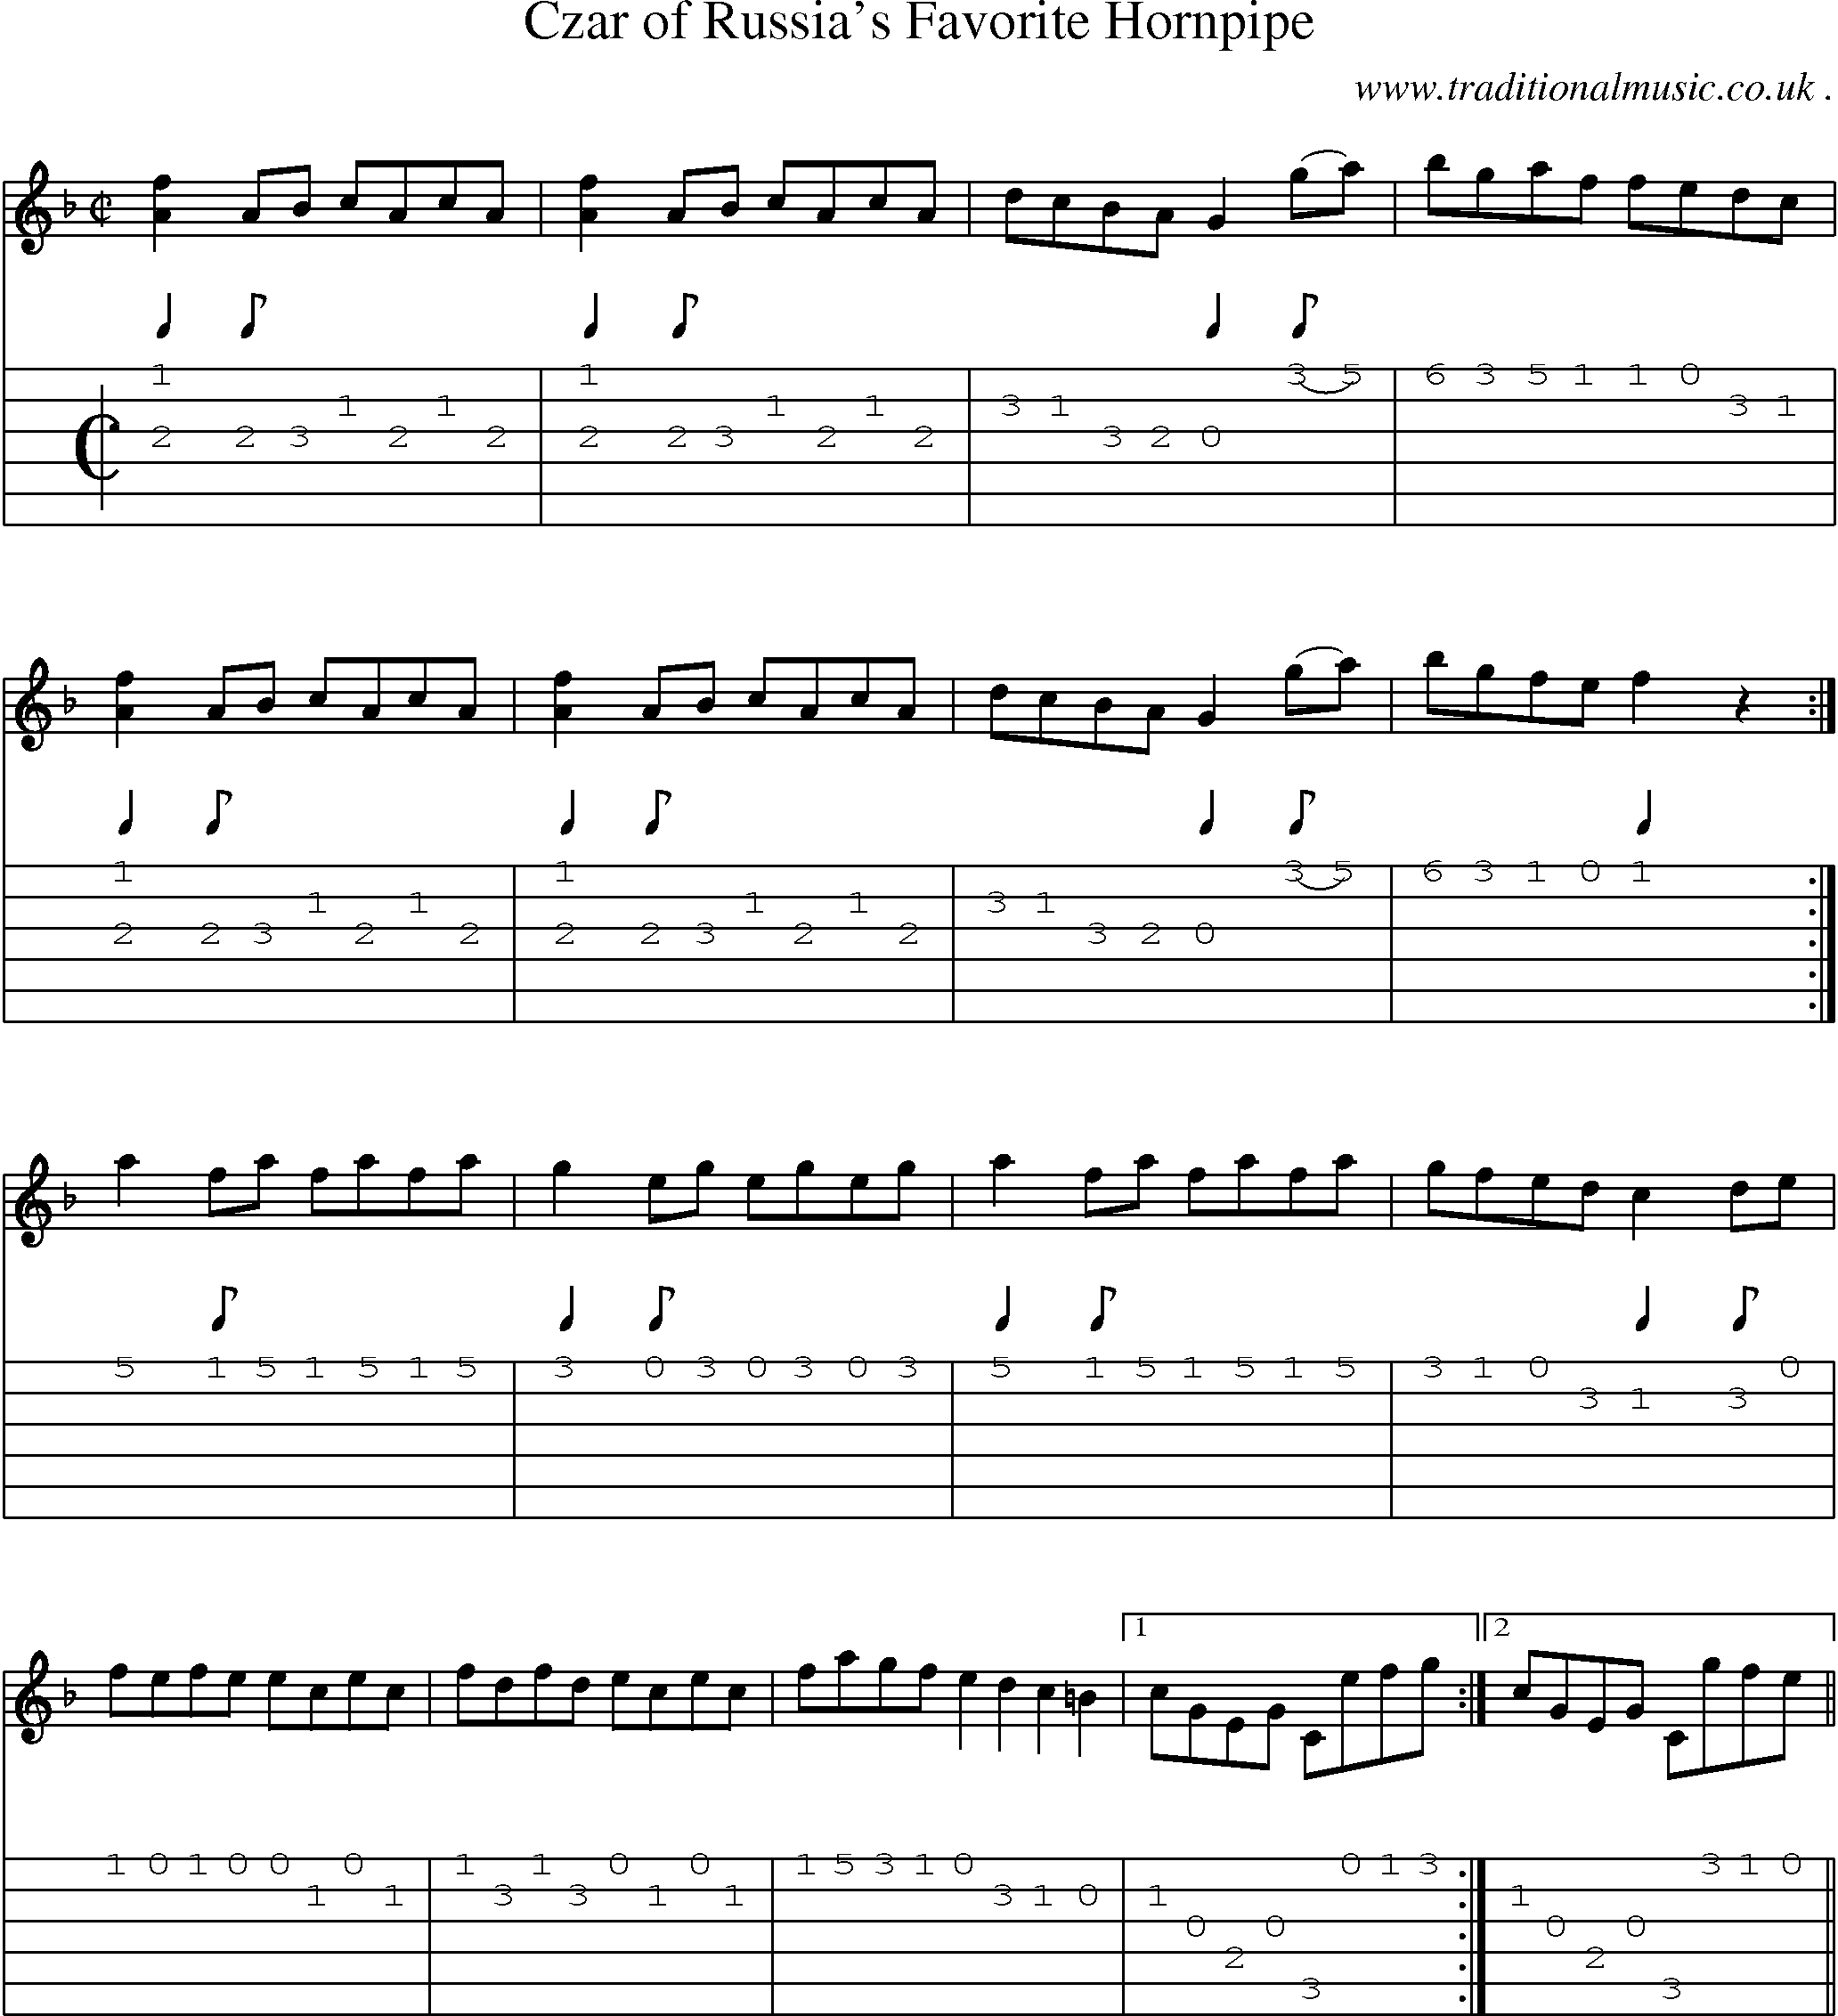 Sheet-Music and Guitar Tabs for Czar Of Russias Favorite Hornpipe